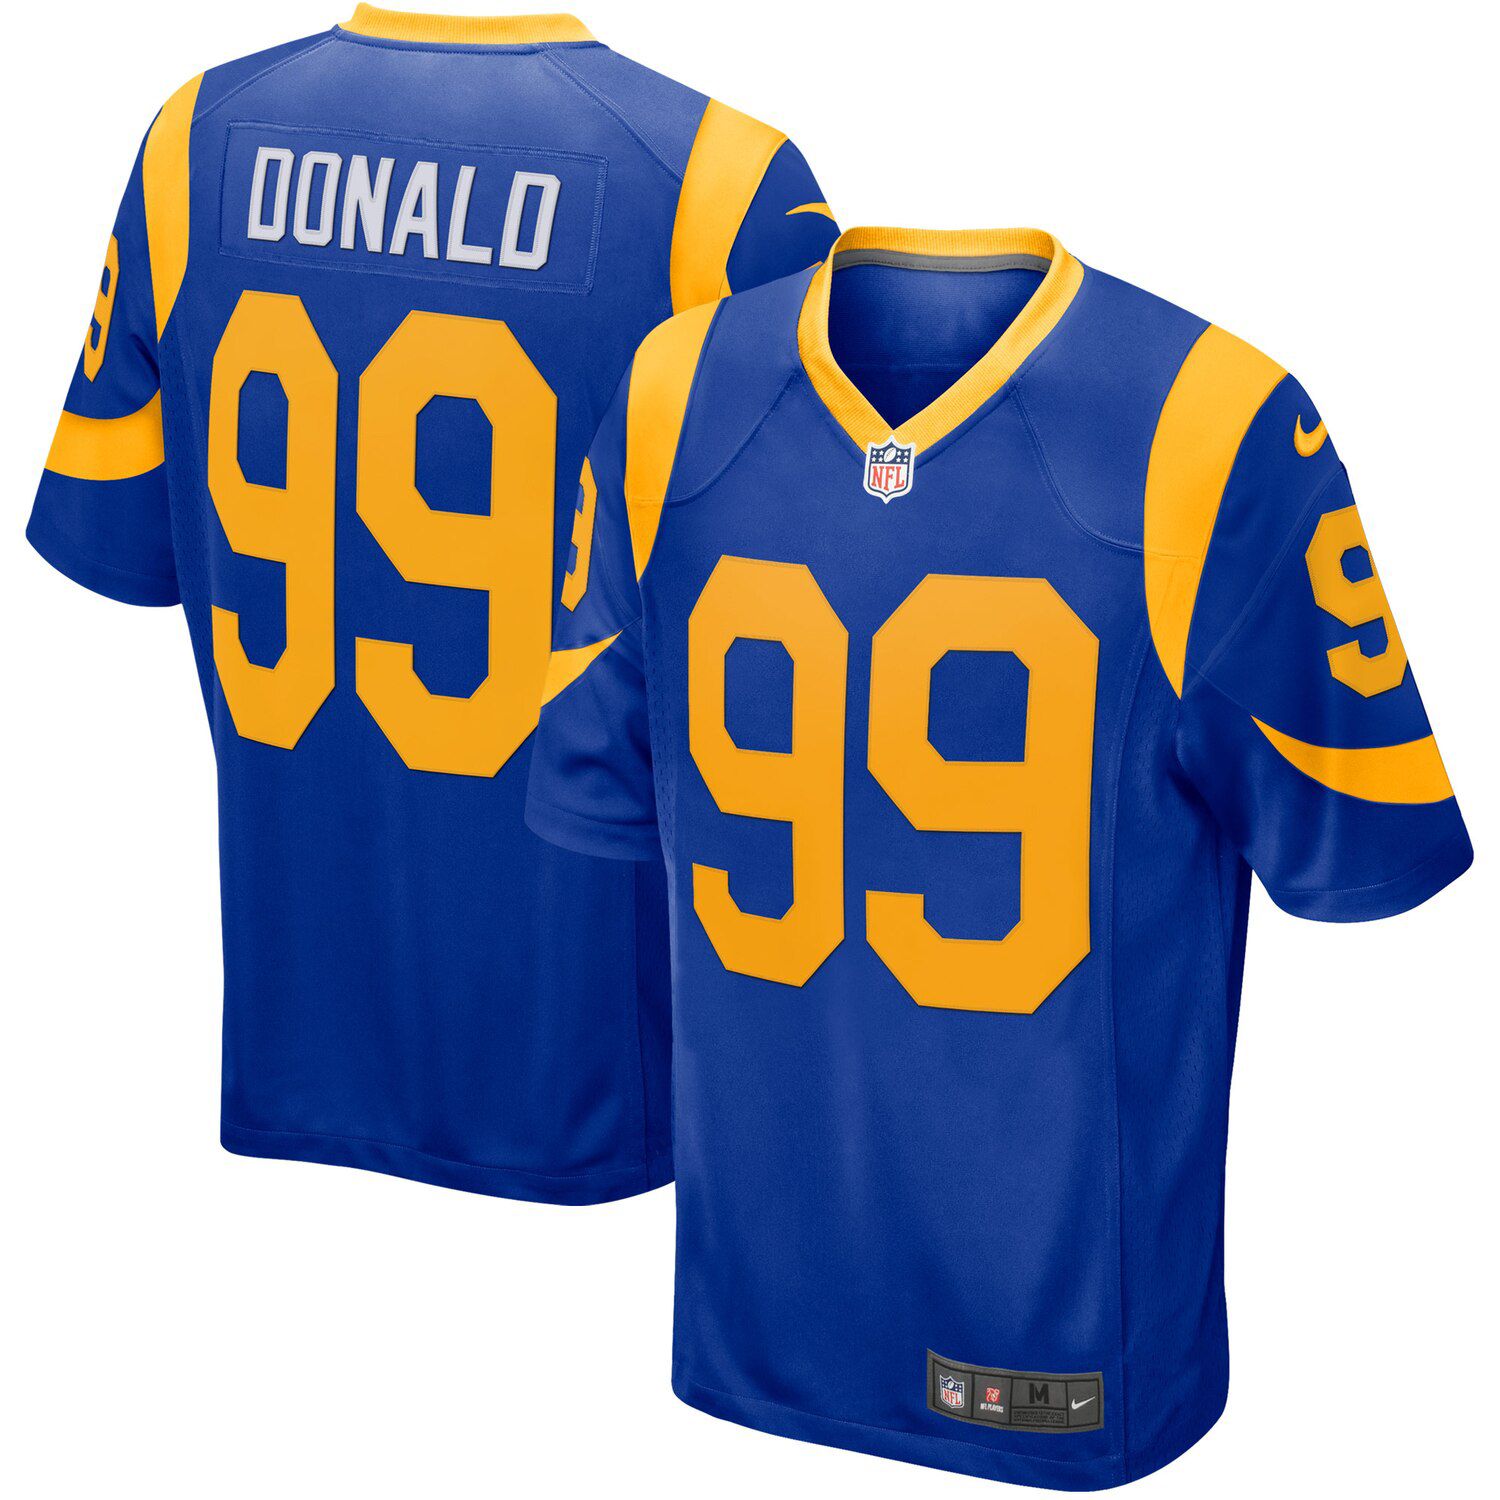 aaron donald signed jersey